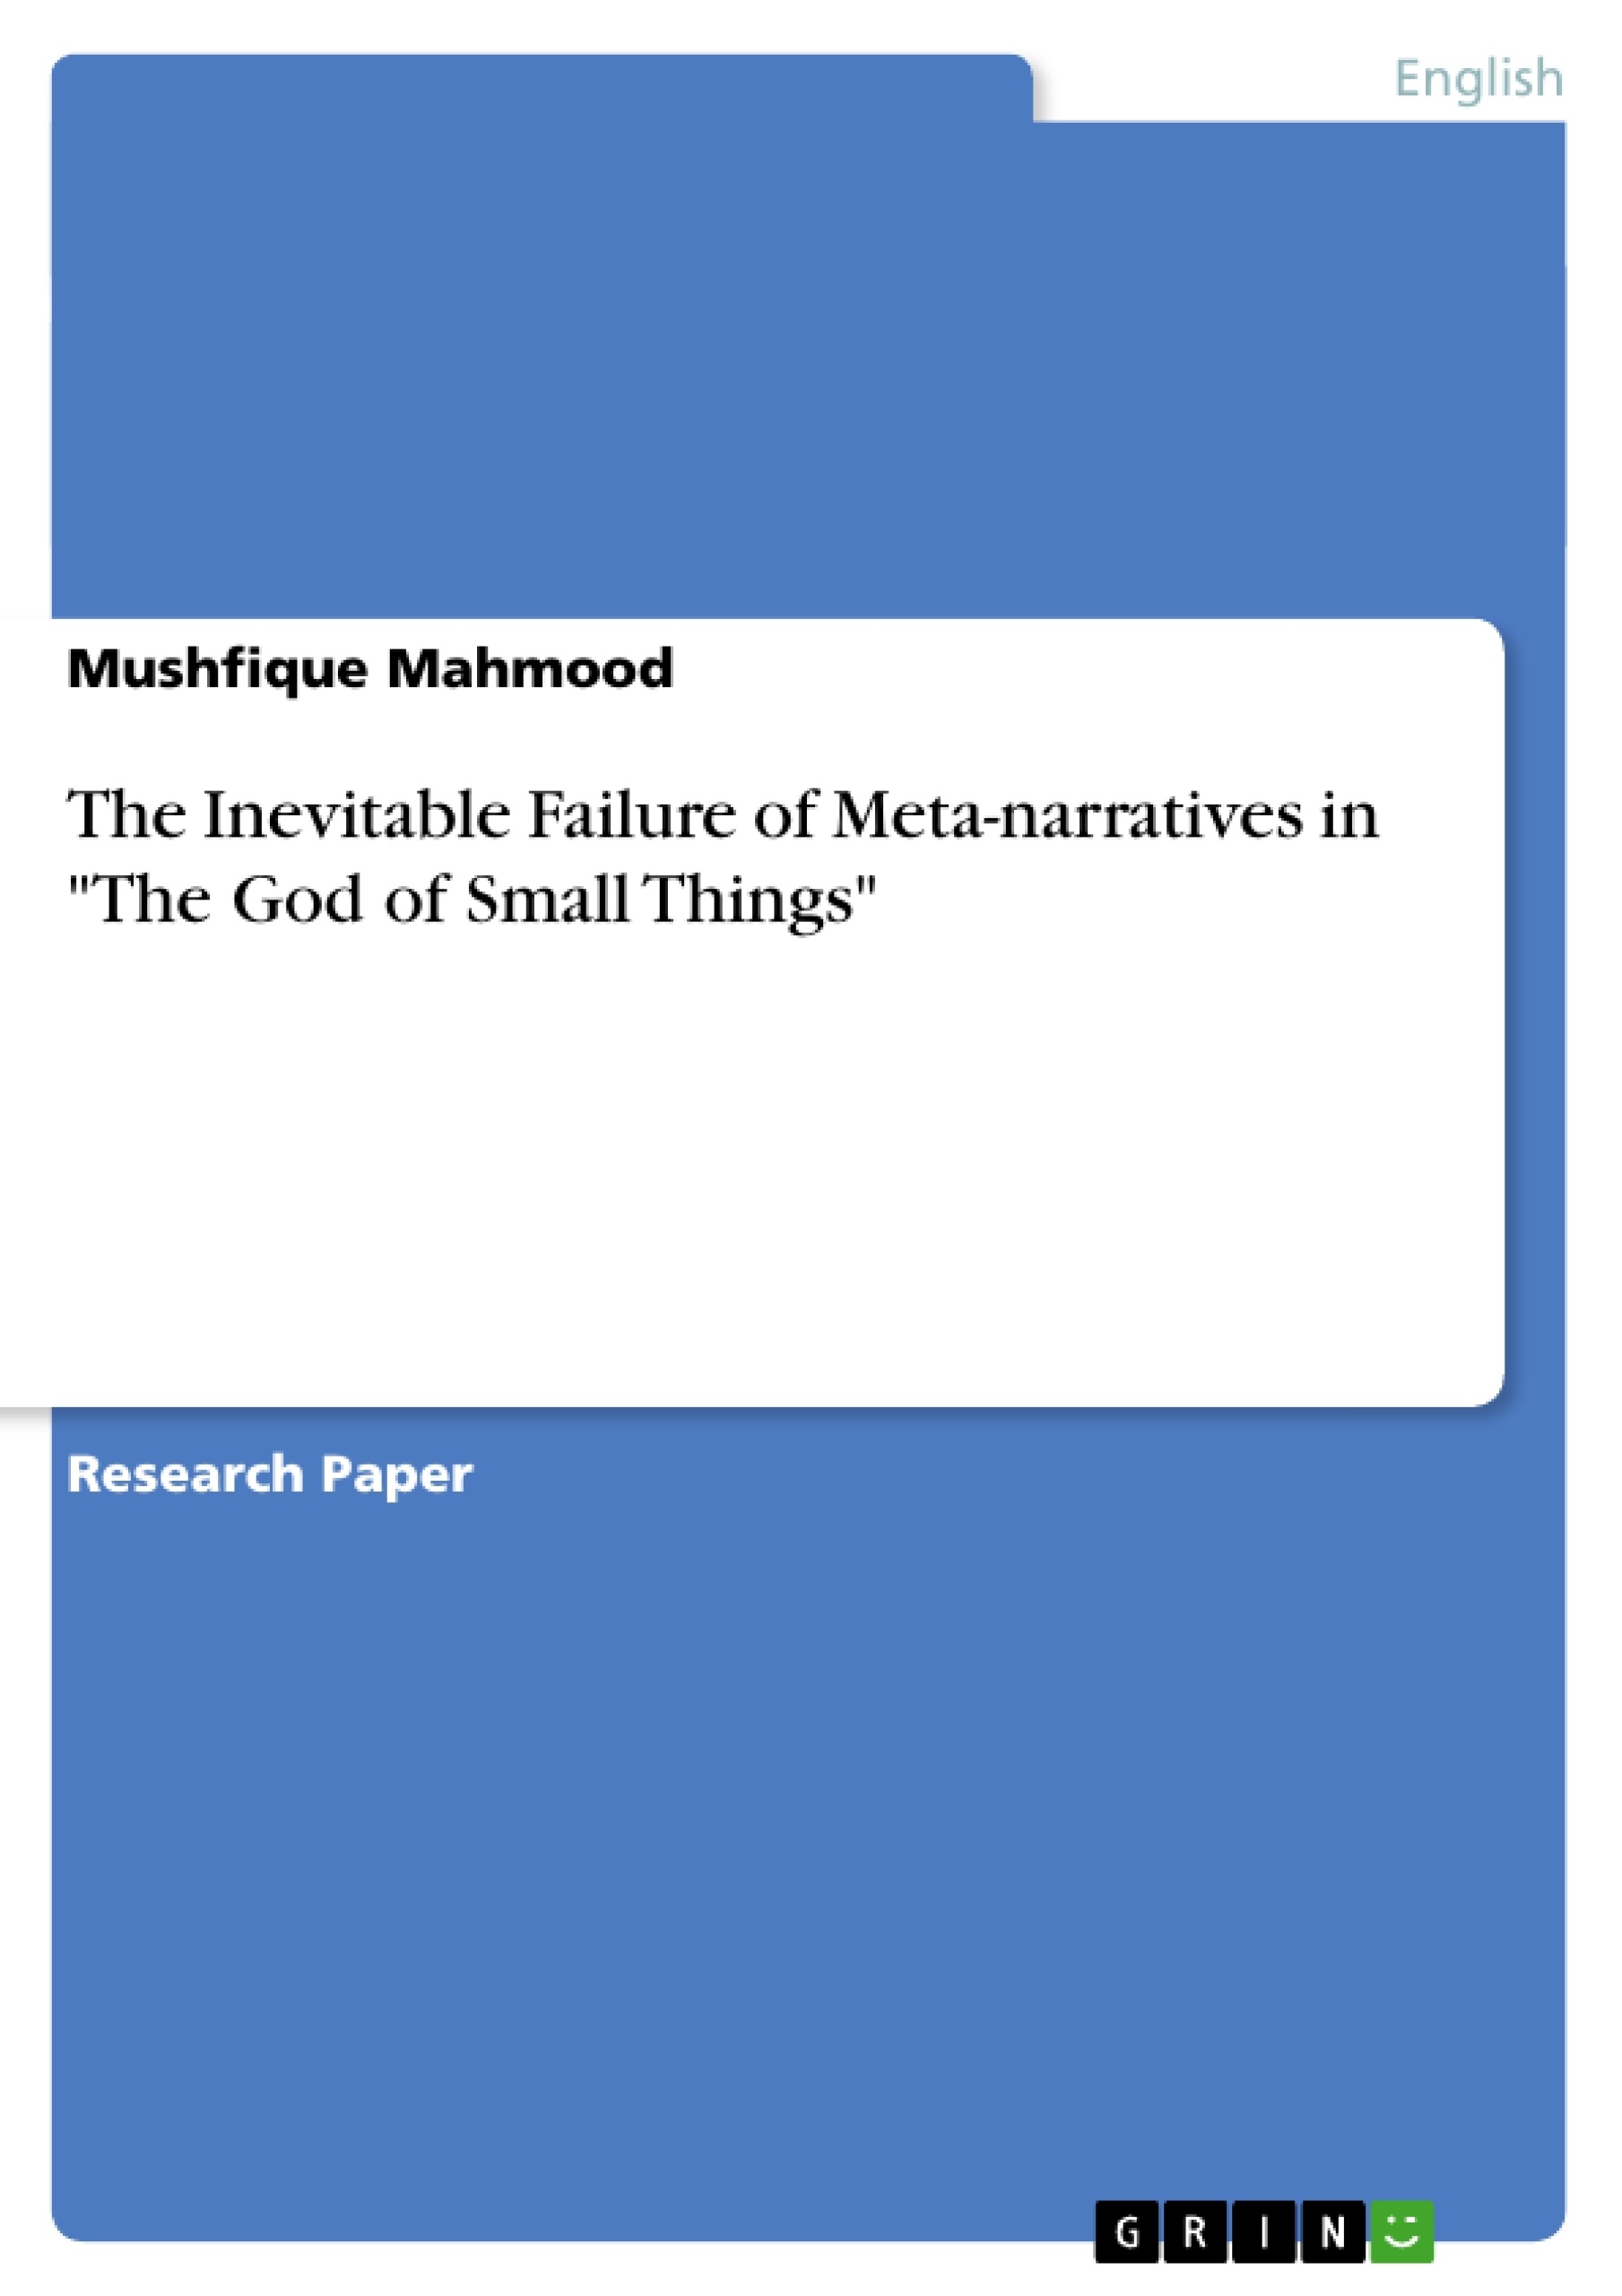 Titre: The Inevitable Failure of Meta-narratives in "The God of Small Things"